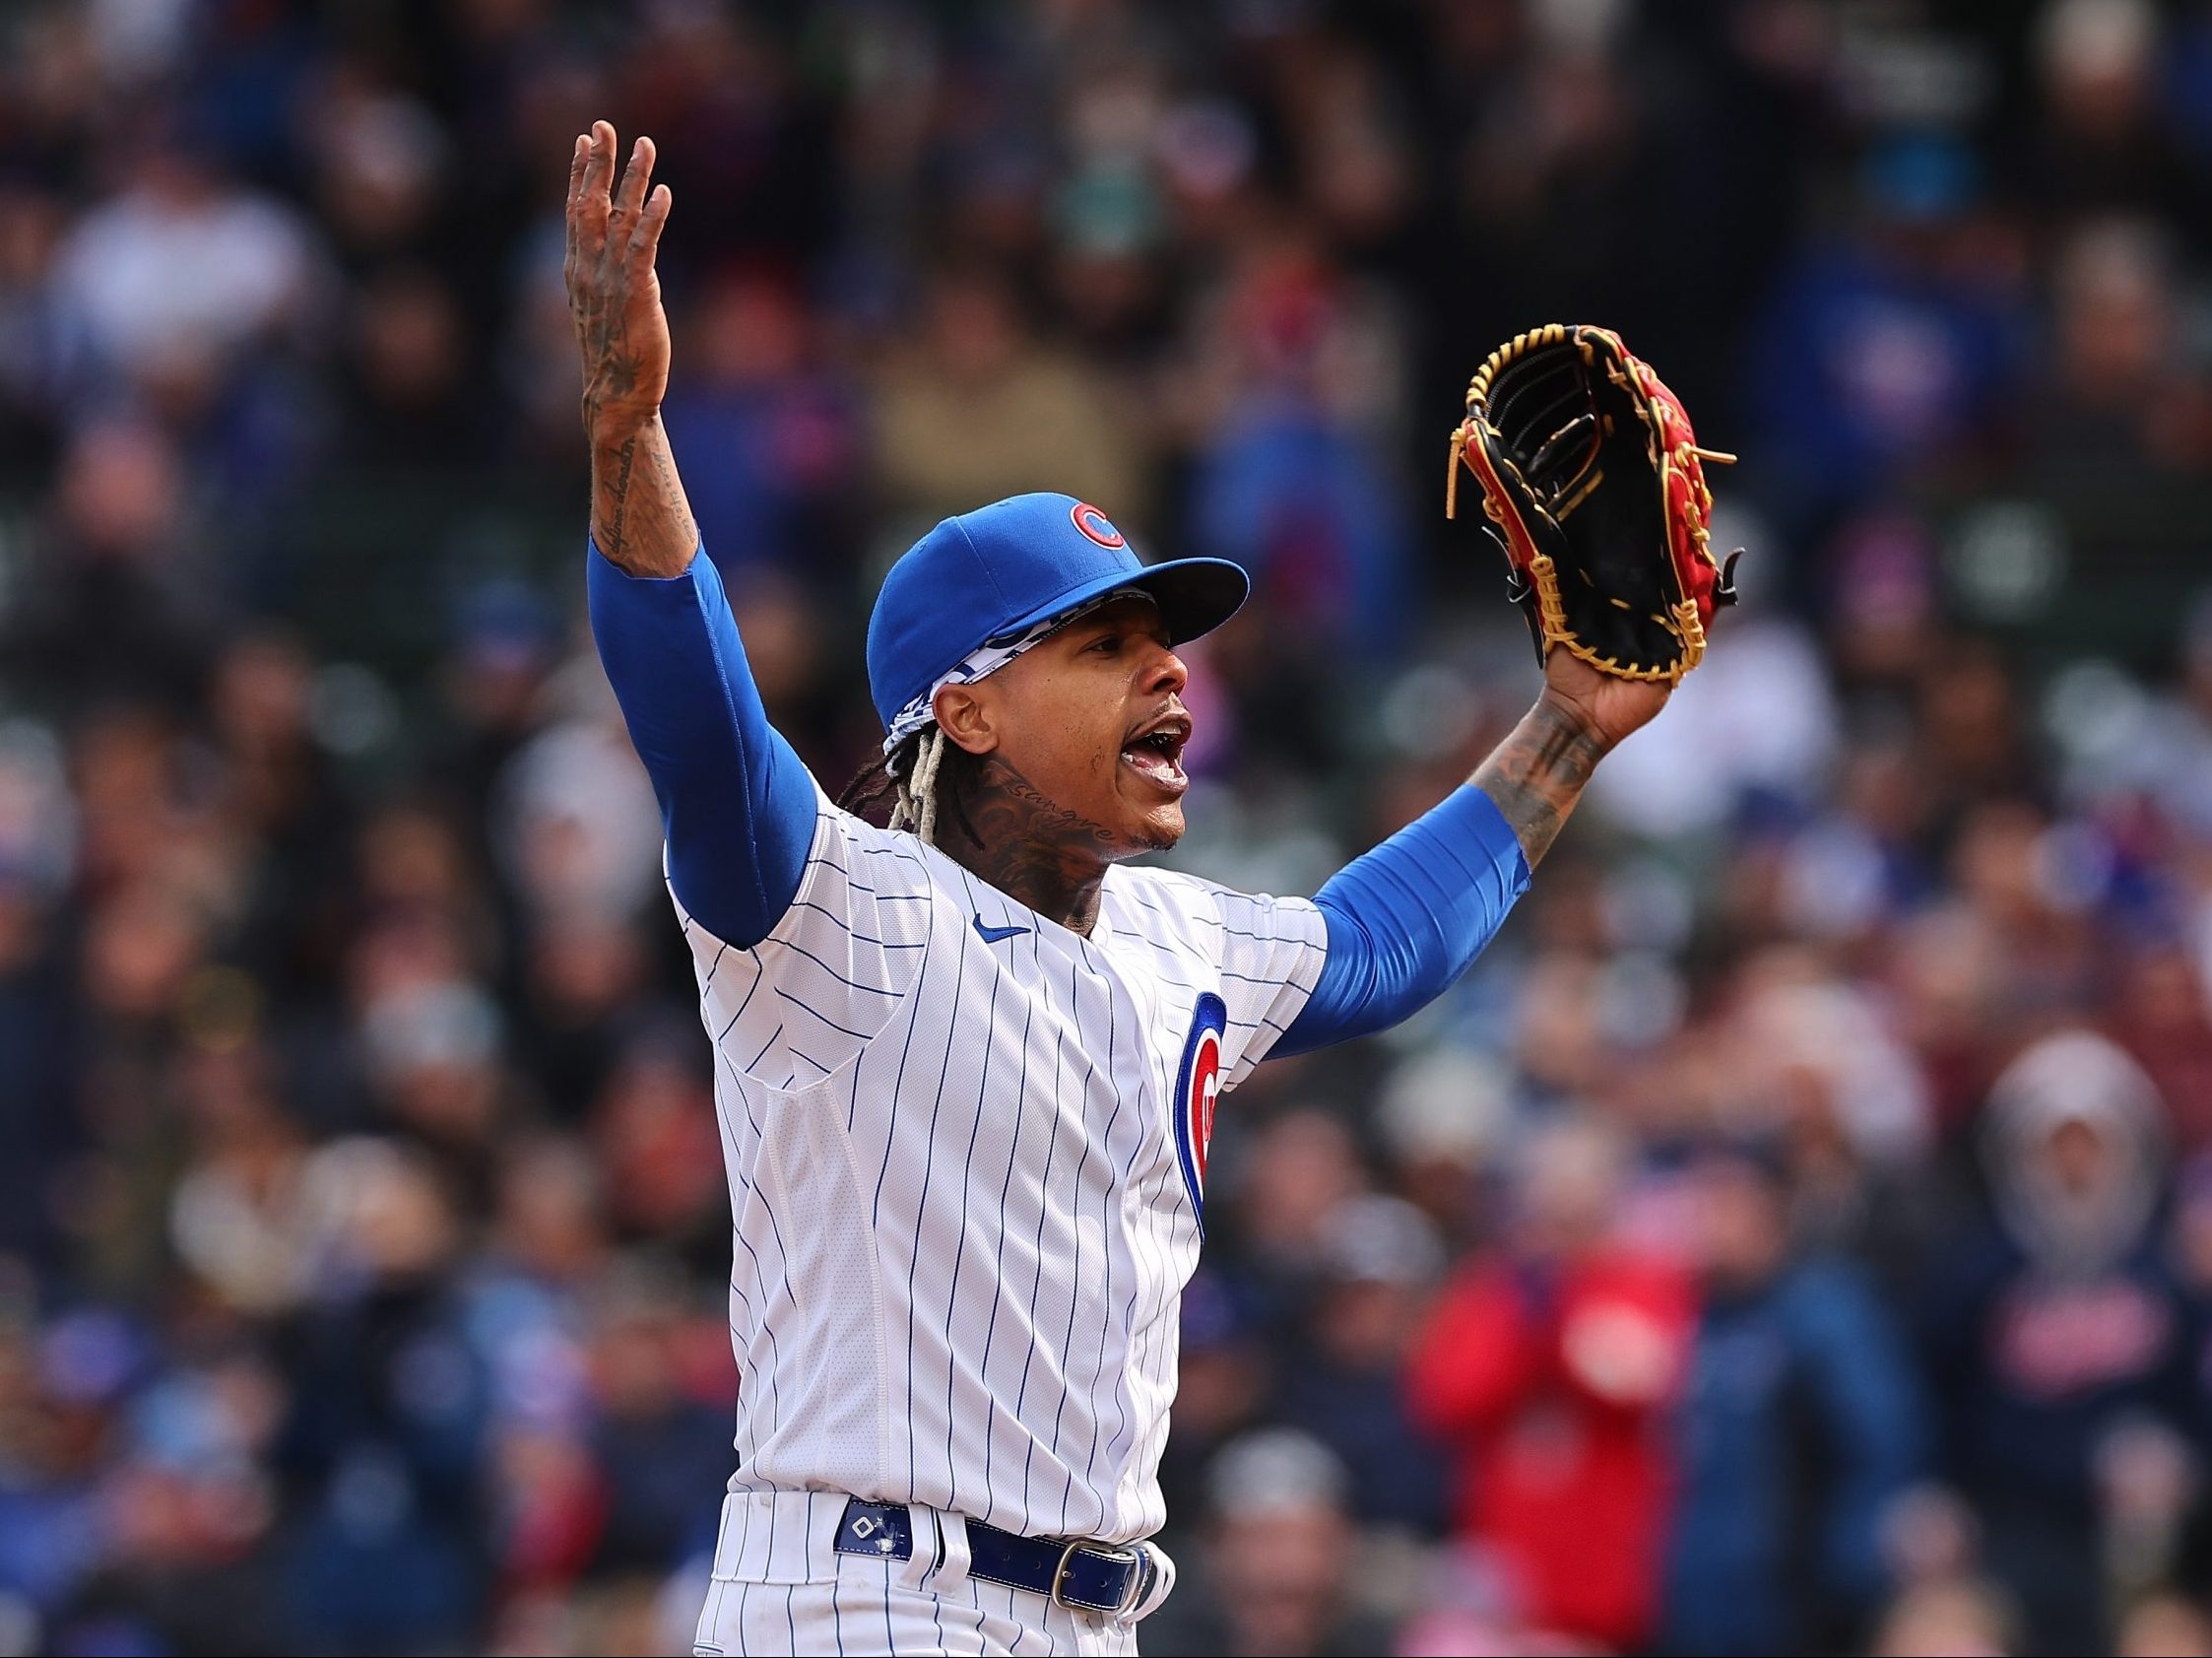 Mets star Marcus Stroman has big plans for cleats he designed